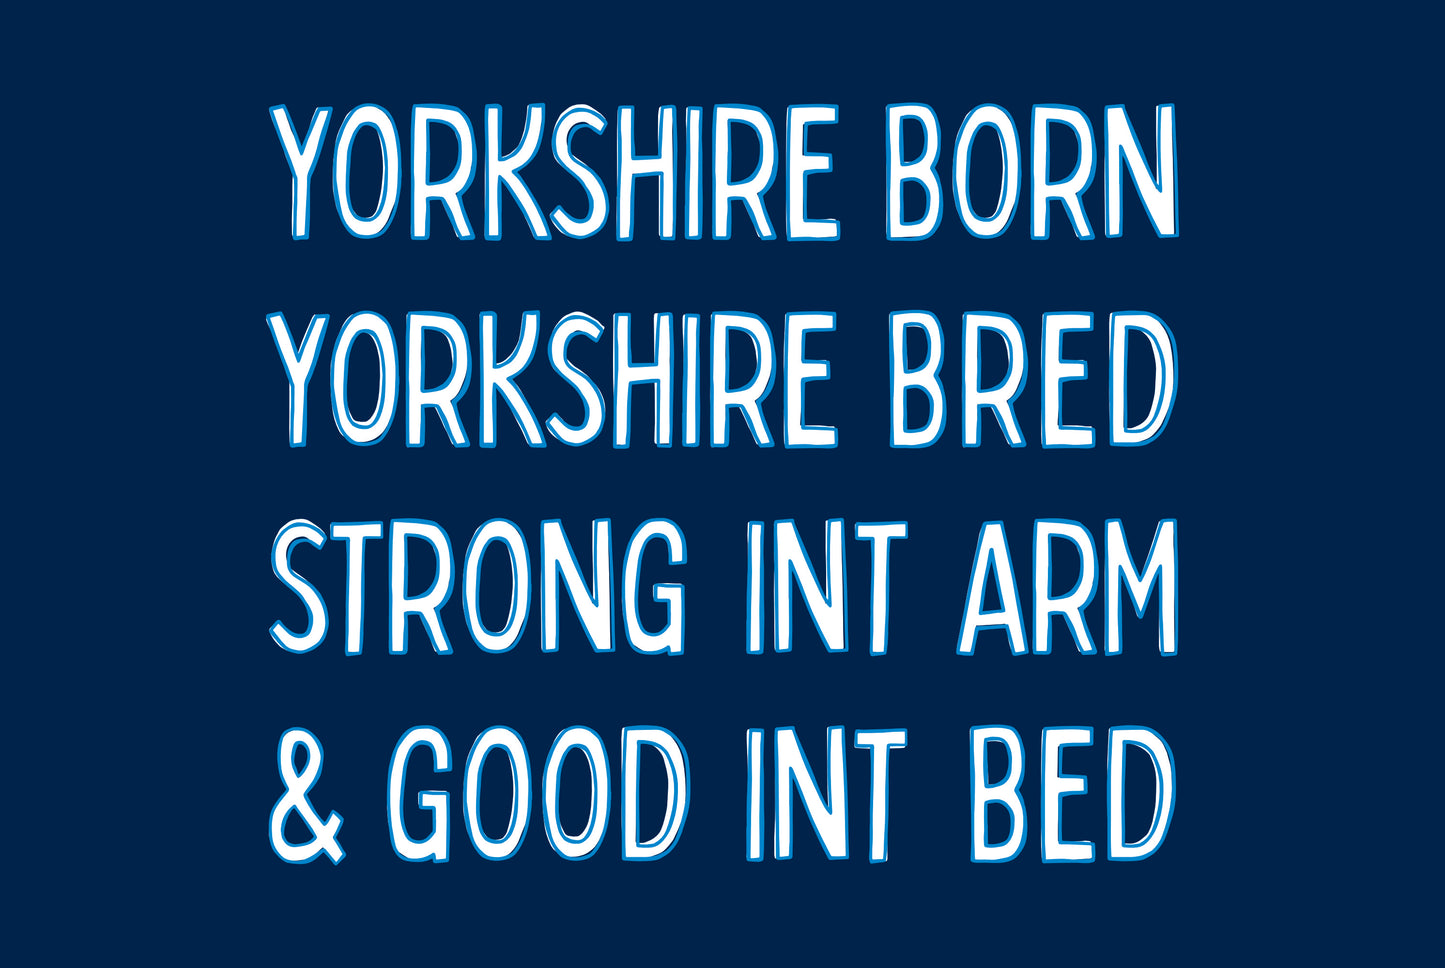 Yorkshire Born Yorkshire Bred Poster